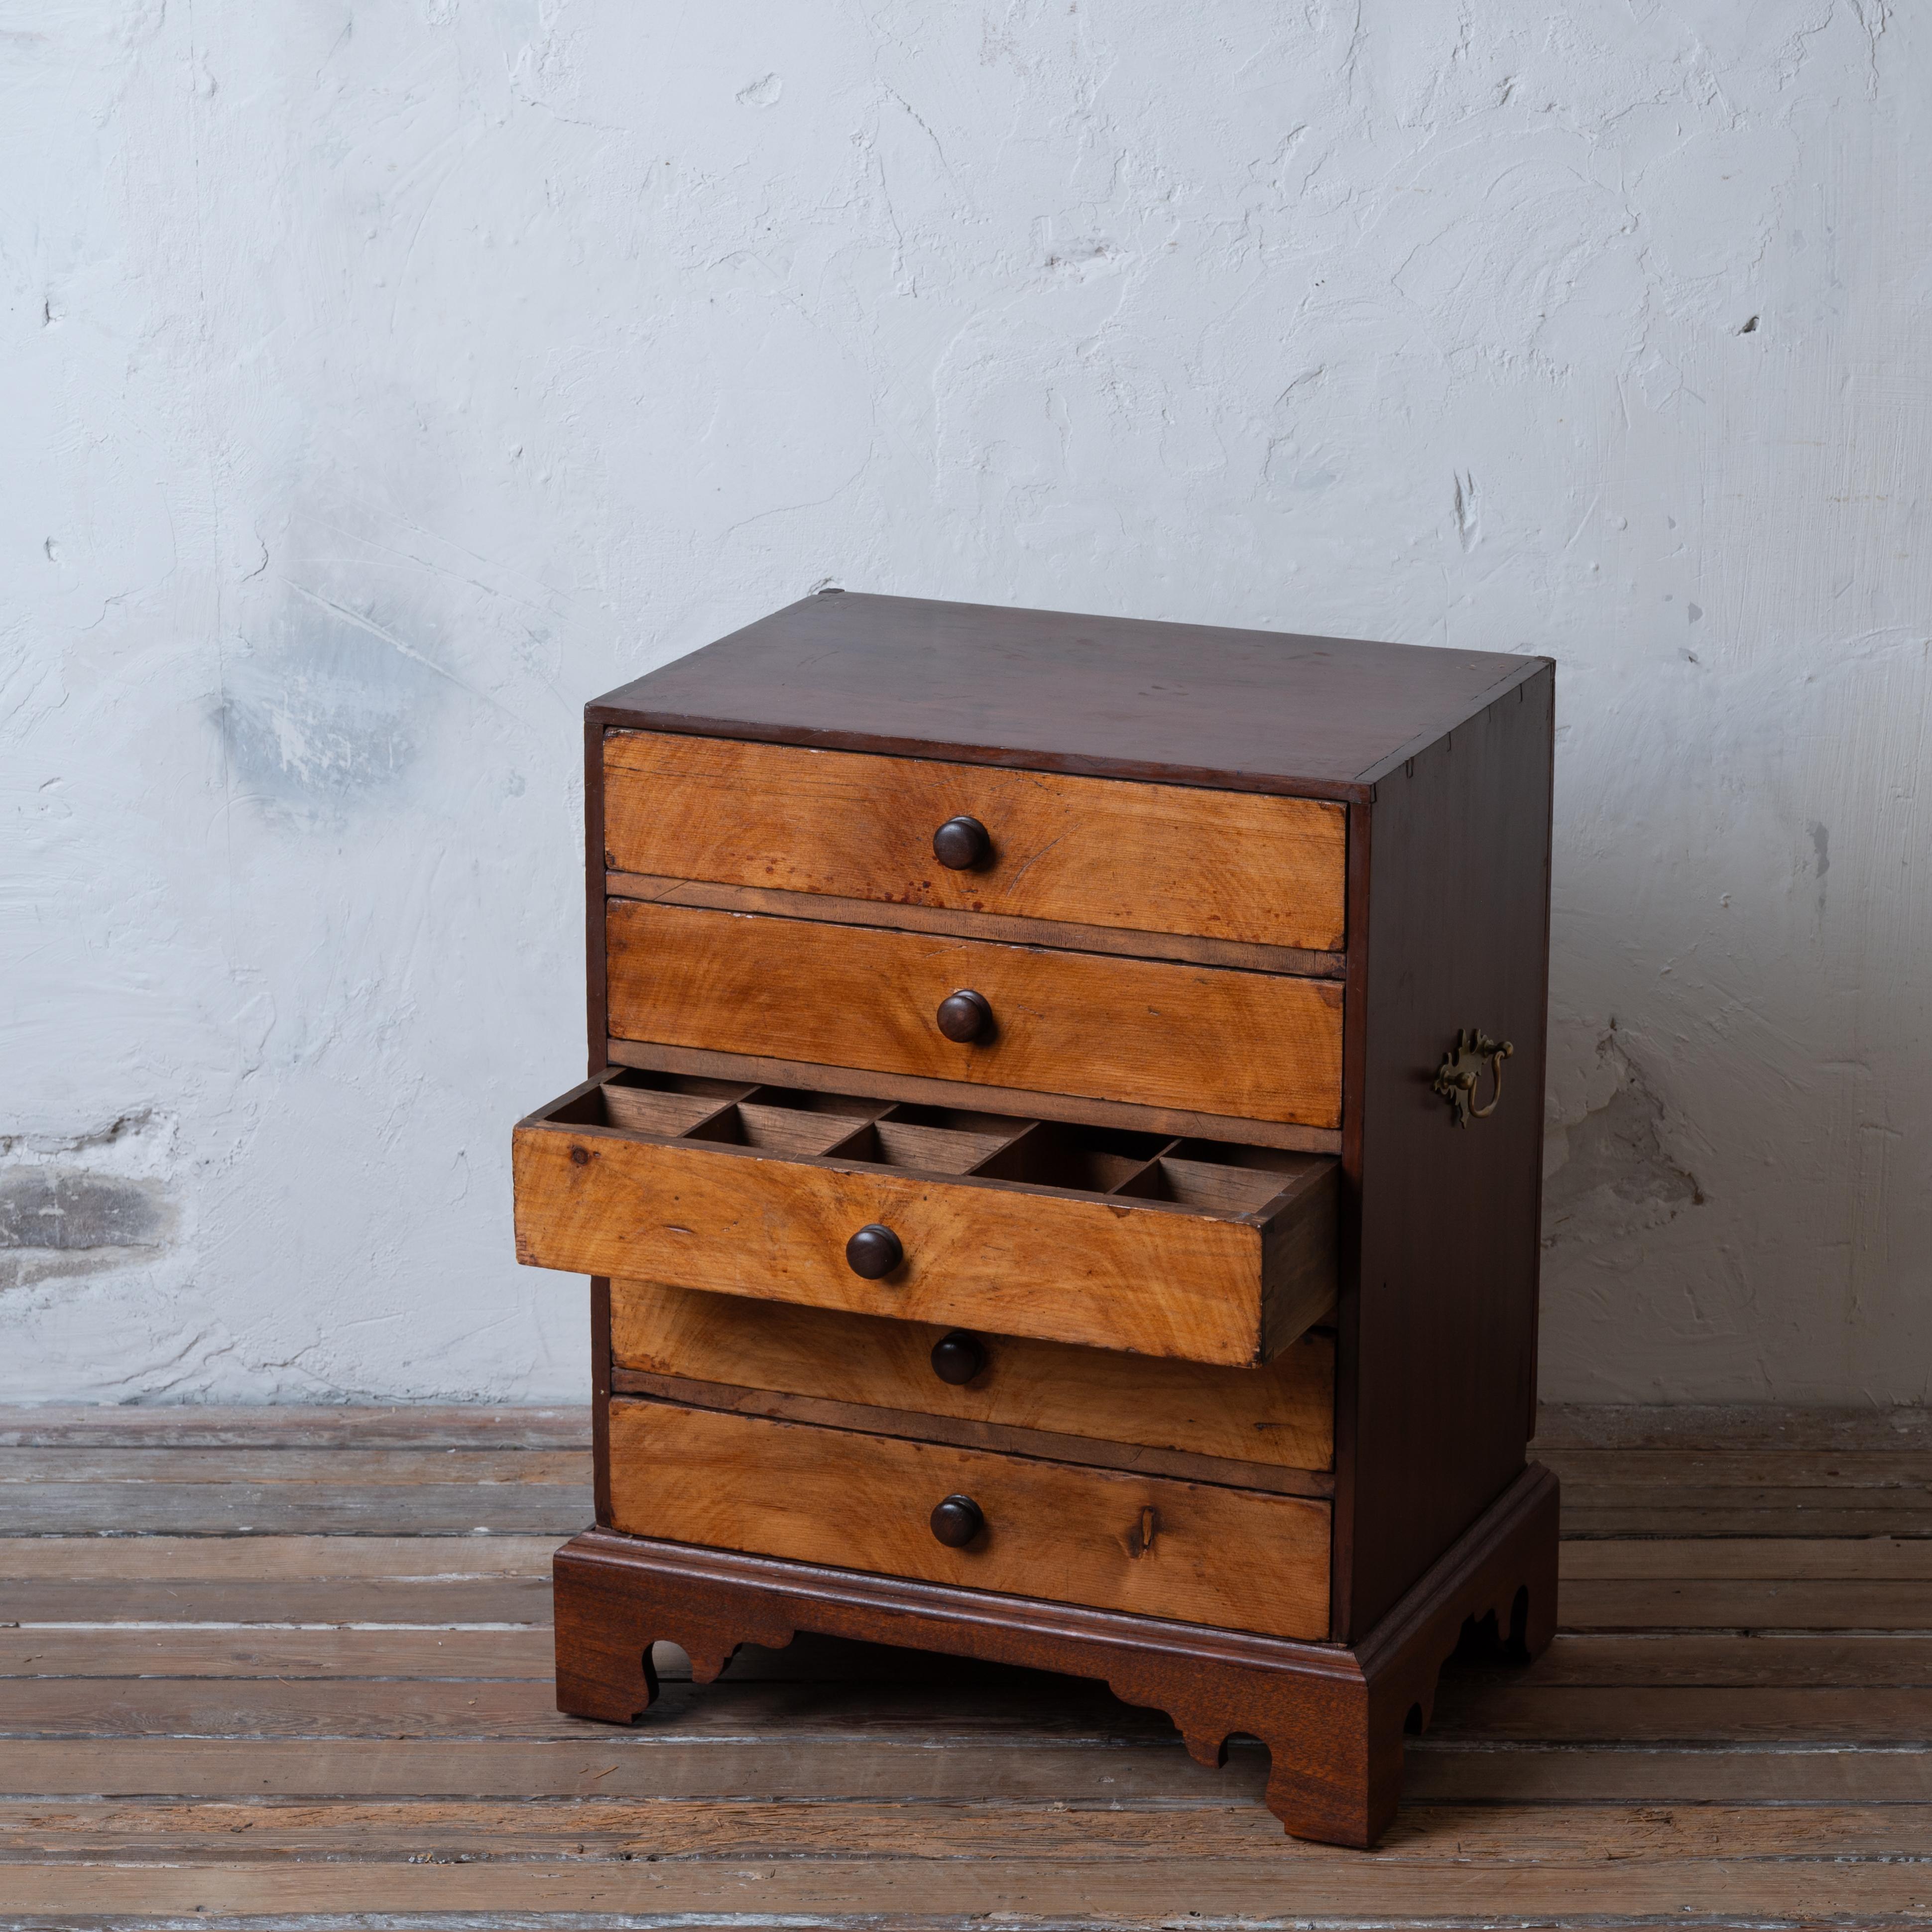 A small collectors or apothecary chest with divided drawers, 19th century.

Composed of walnut and grain-painted pine with later mahogany chippendale bracket feet.  Each drawer has dividers with the exception of the bottom drawer. 

22 ¾ inches wide